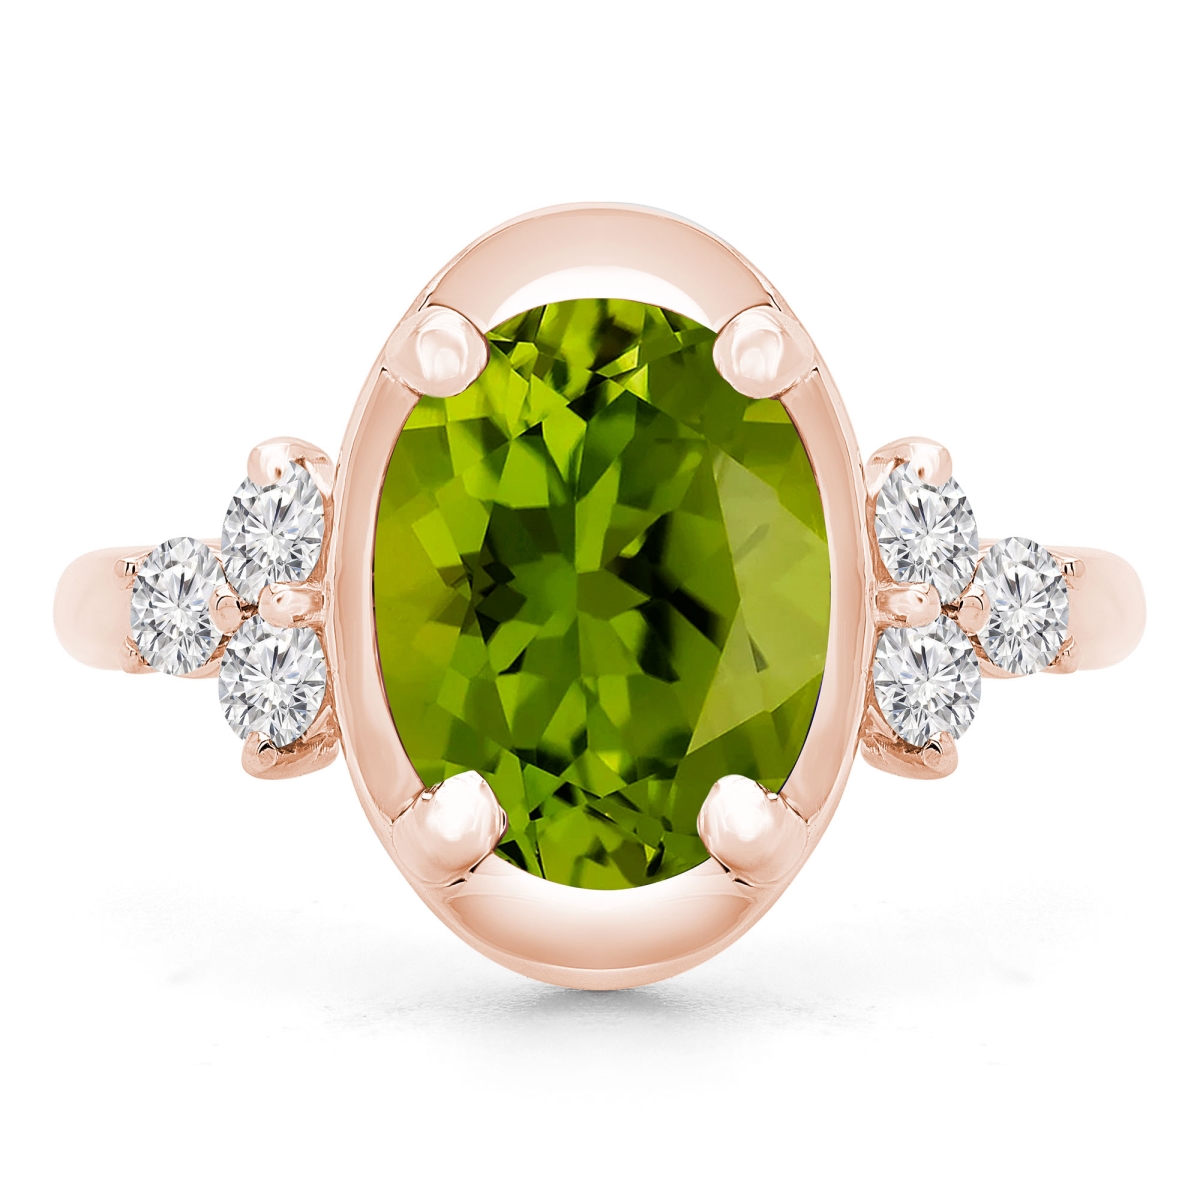 Picture of Majesty Diamonds MD190412-3.25 3.9 CTW Oval Green Peridot Cocktail Ring in 14K Rose Gold - Size 3.25